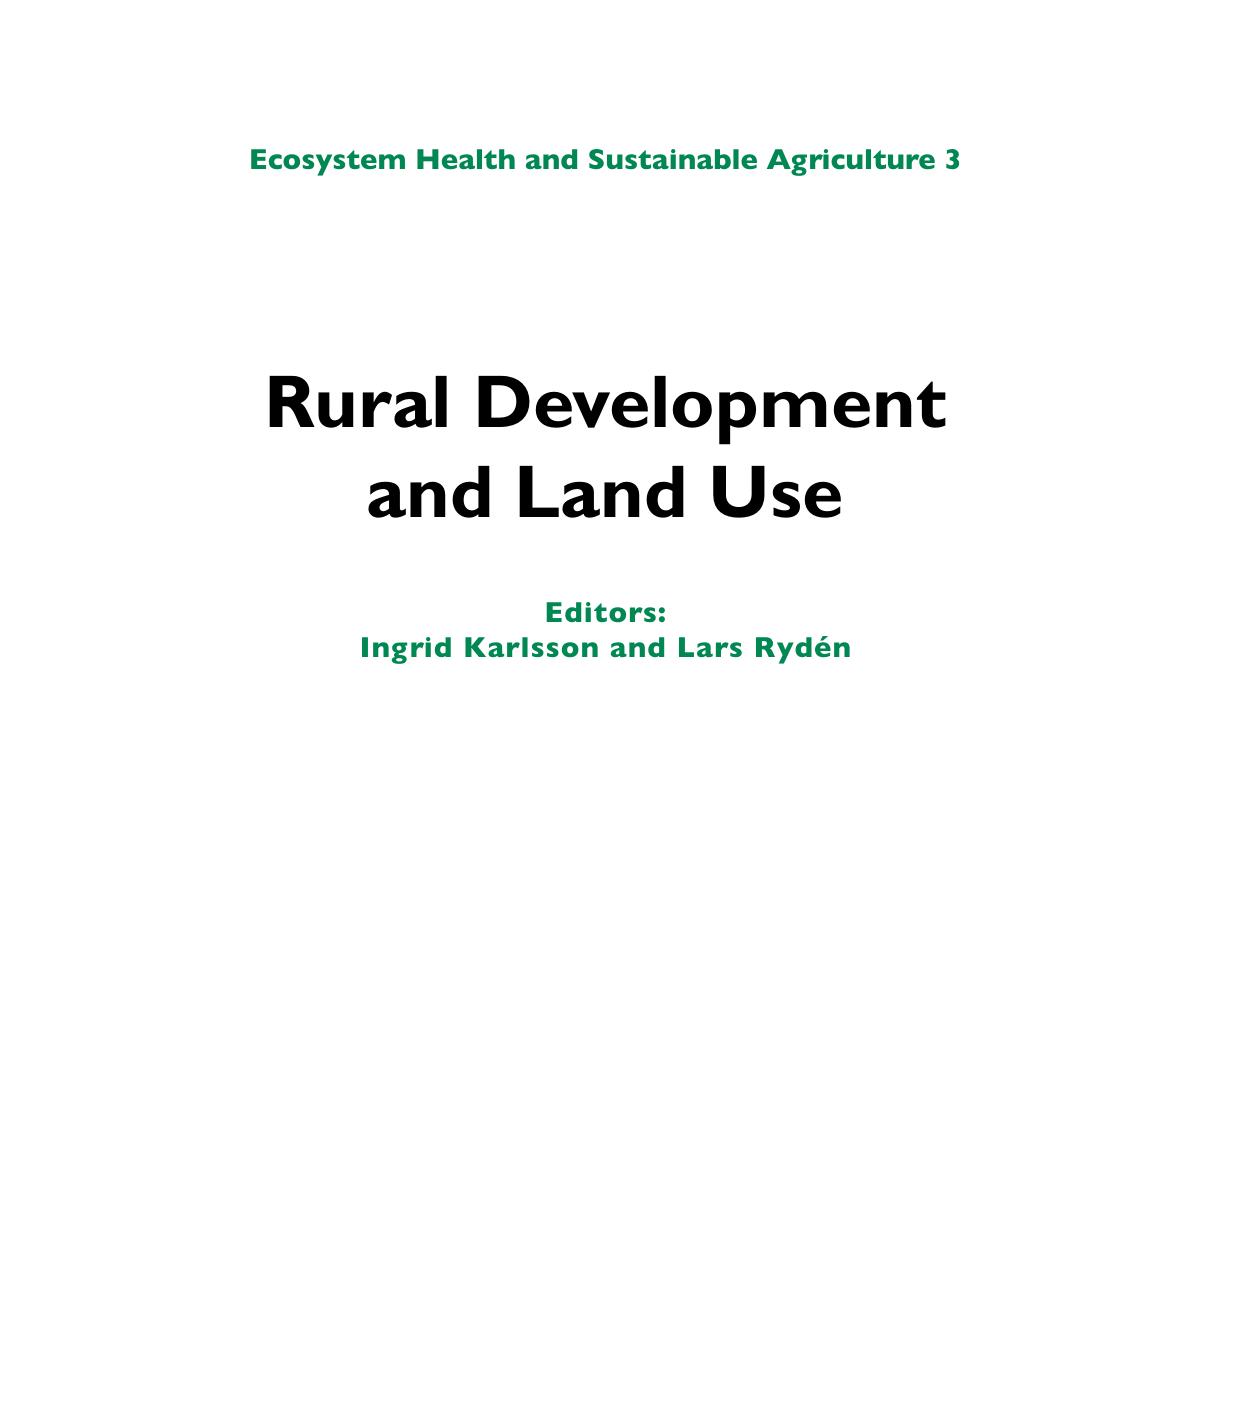 Rural Development and Land Use 2012